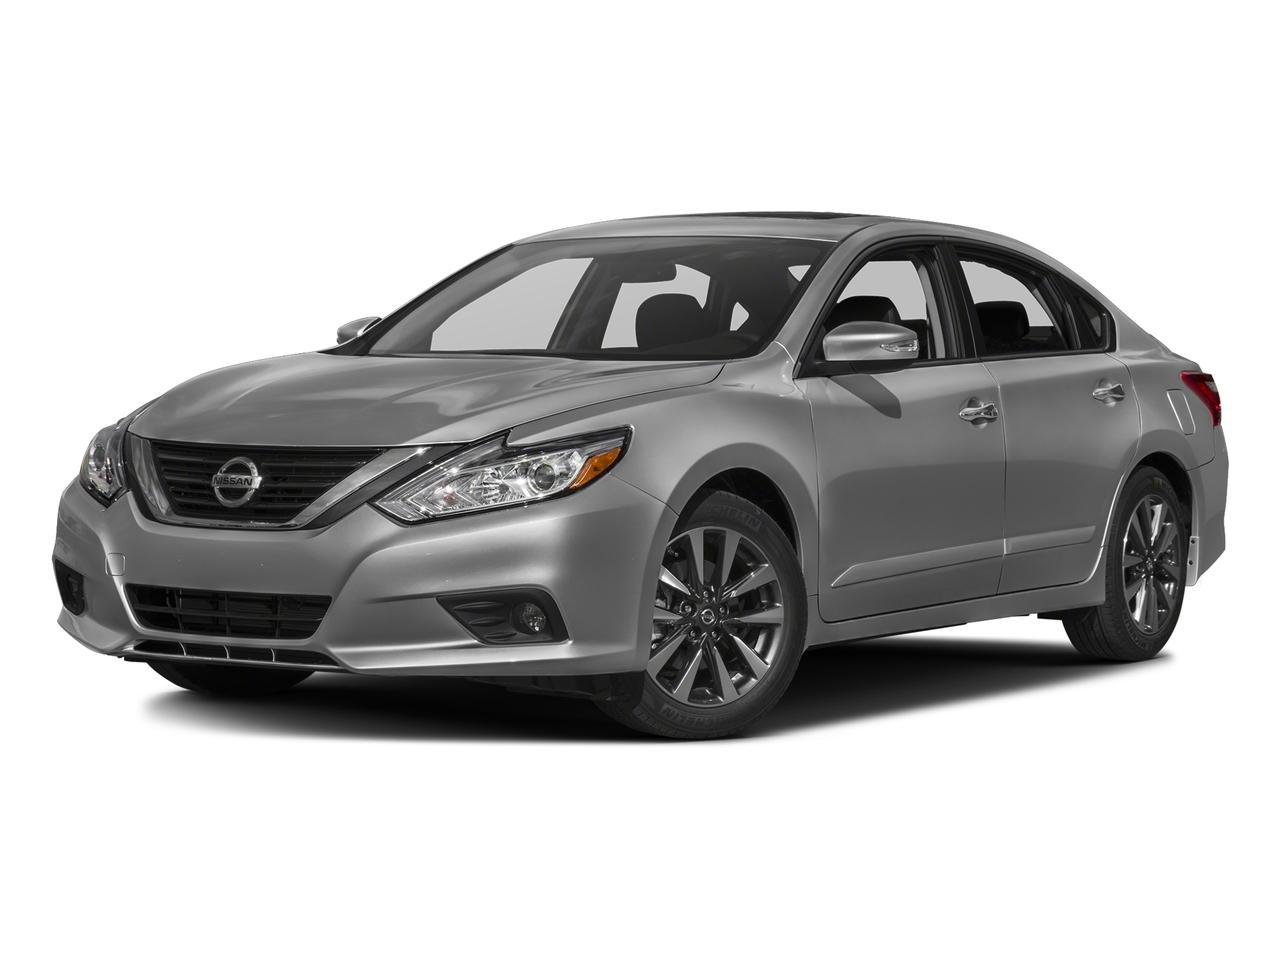 2016 Nissan Altima Vehicle Photo in Quakertown, PA 18951